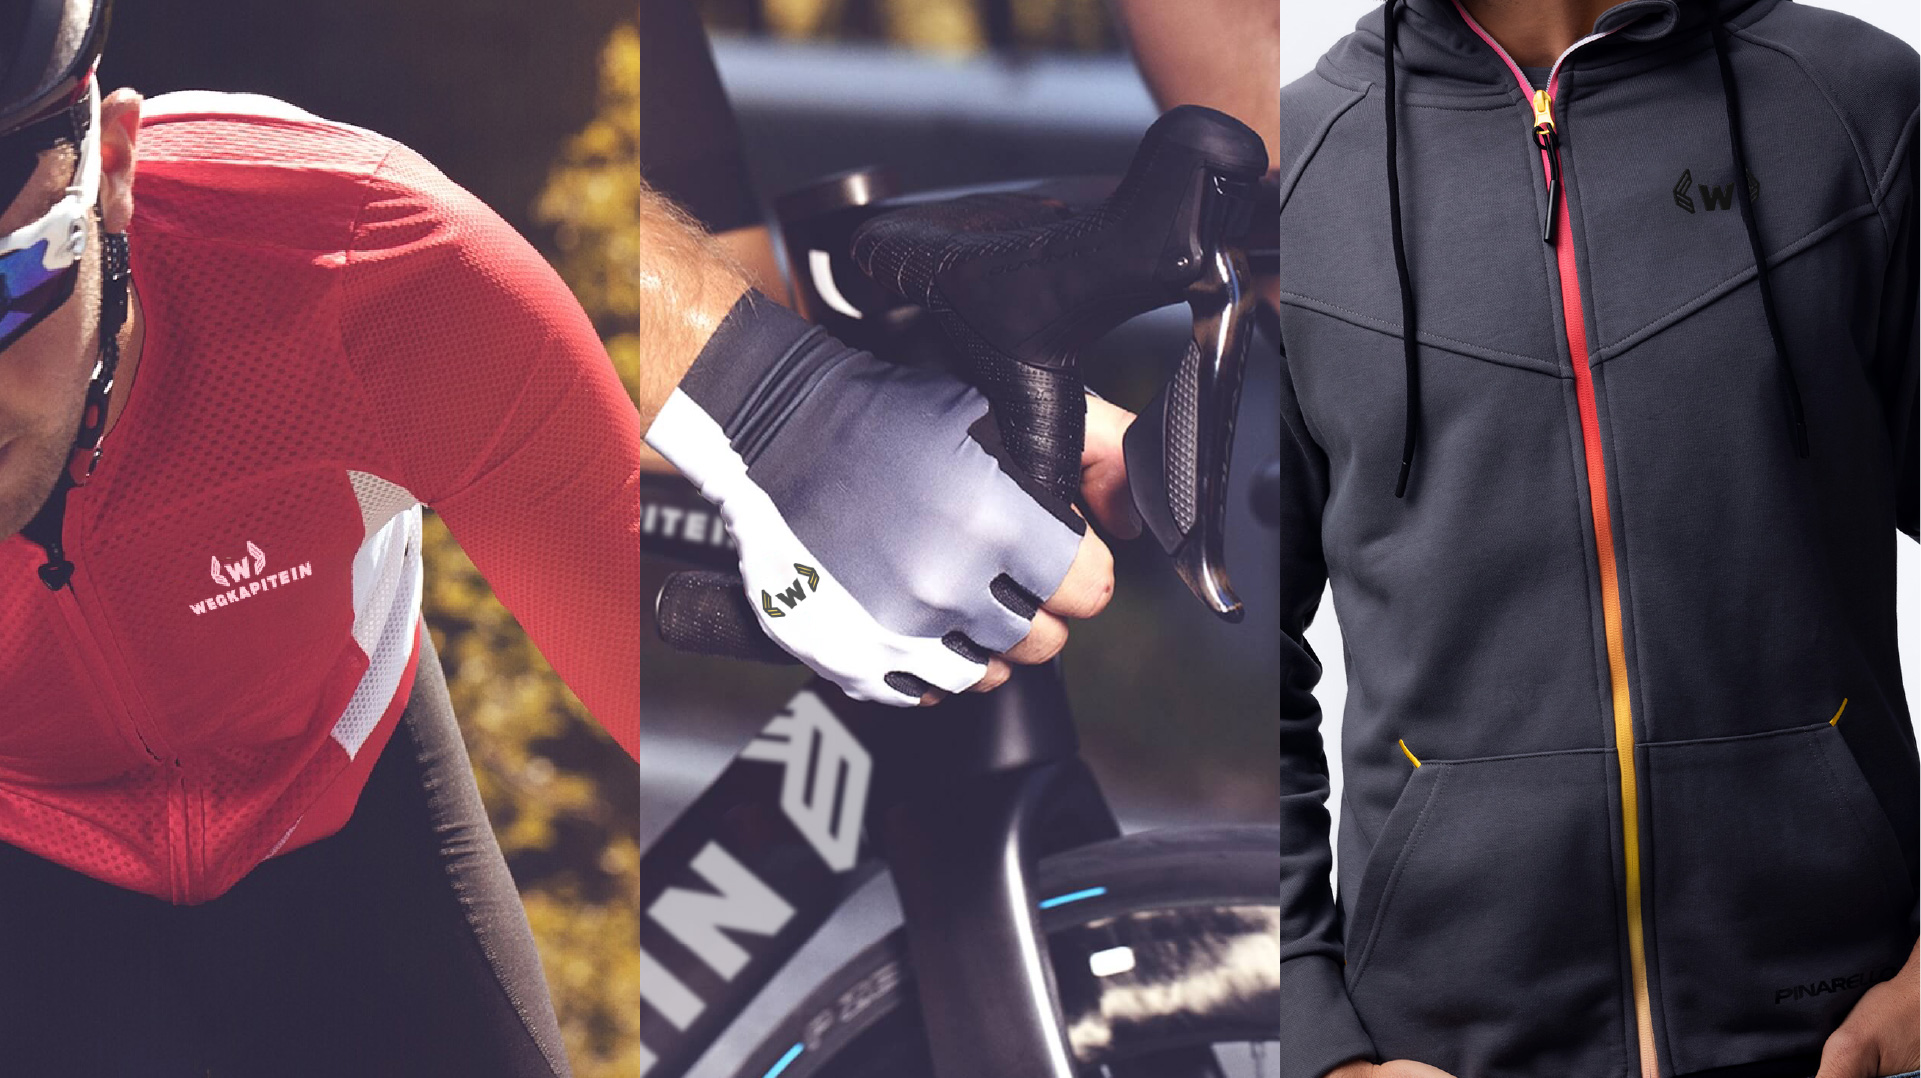 Branded clothing like cycling jersey, cycling gloves and a jumper with the logo printed or embossed onto it